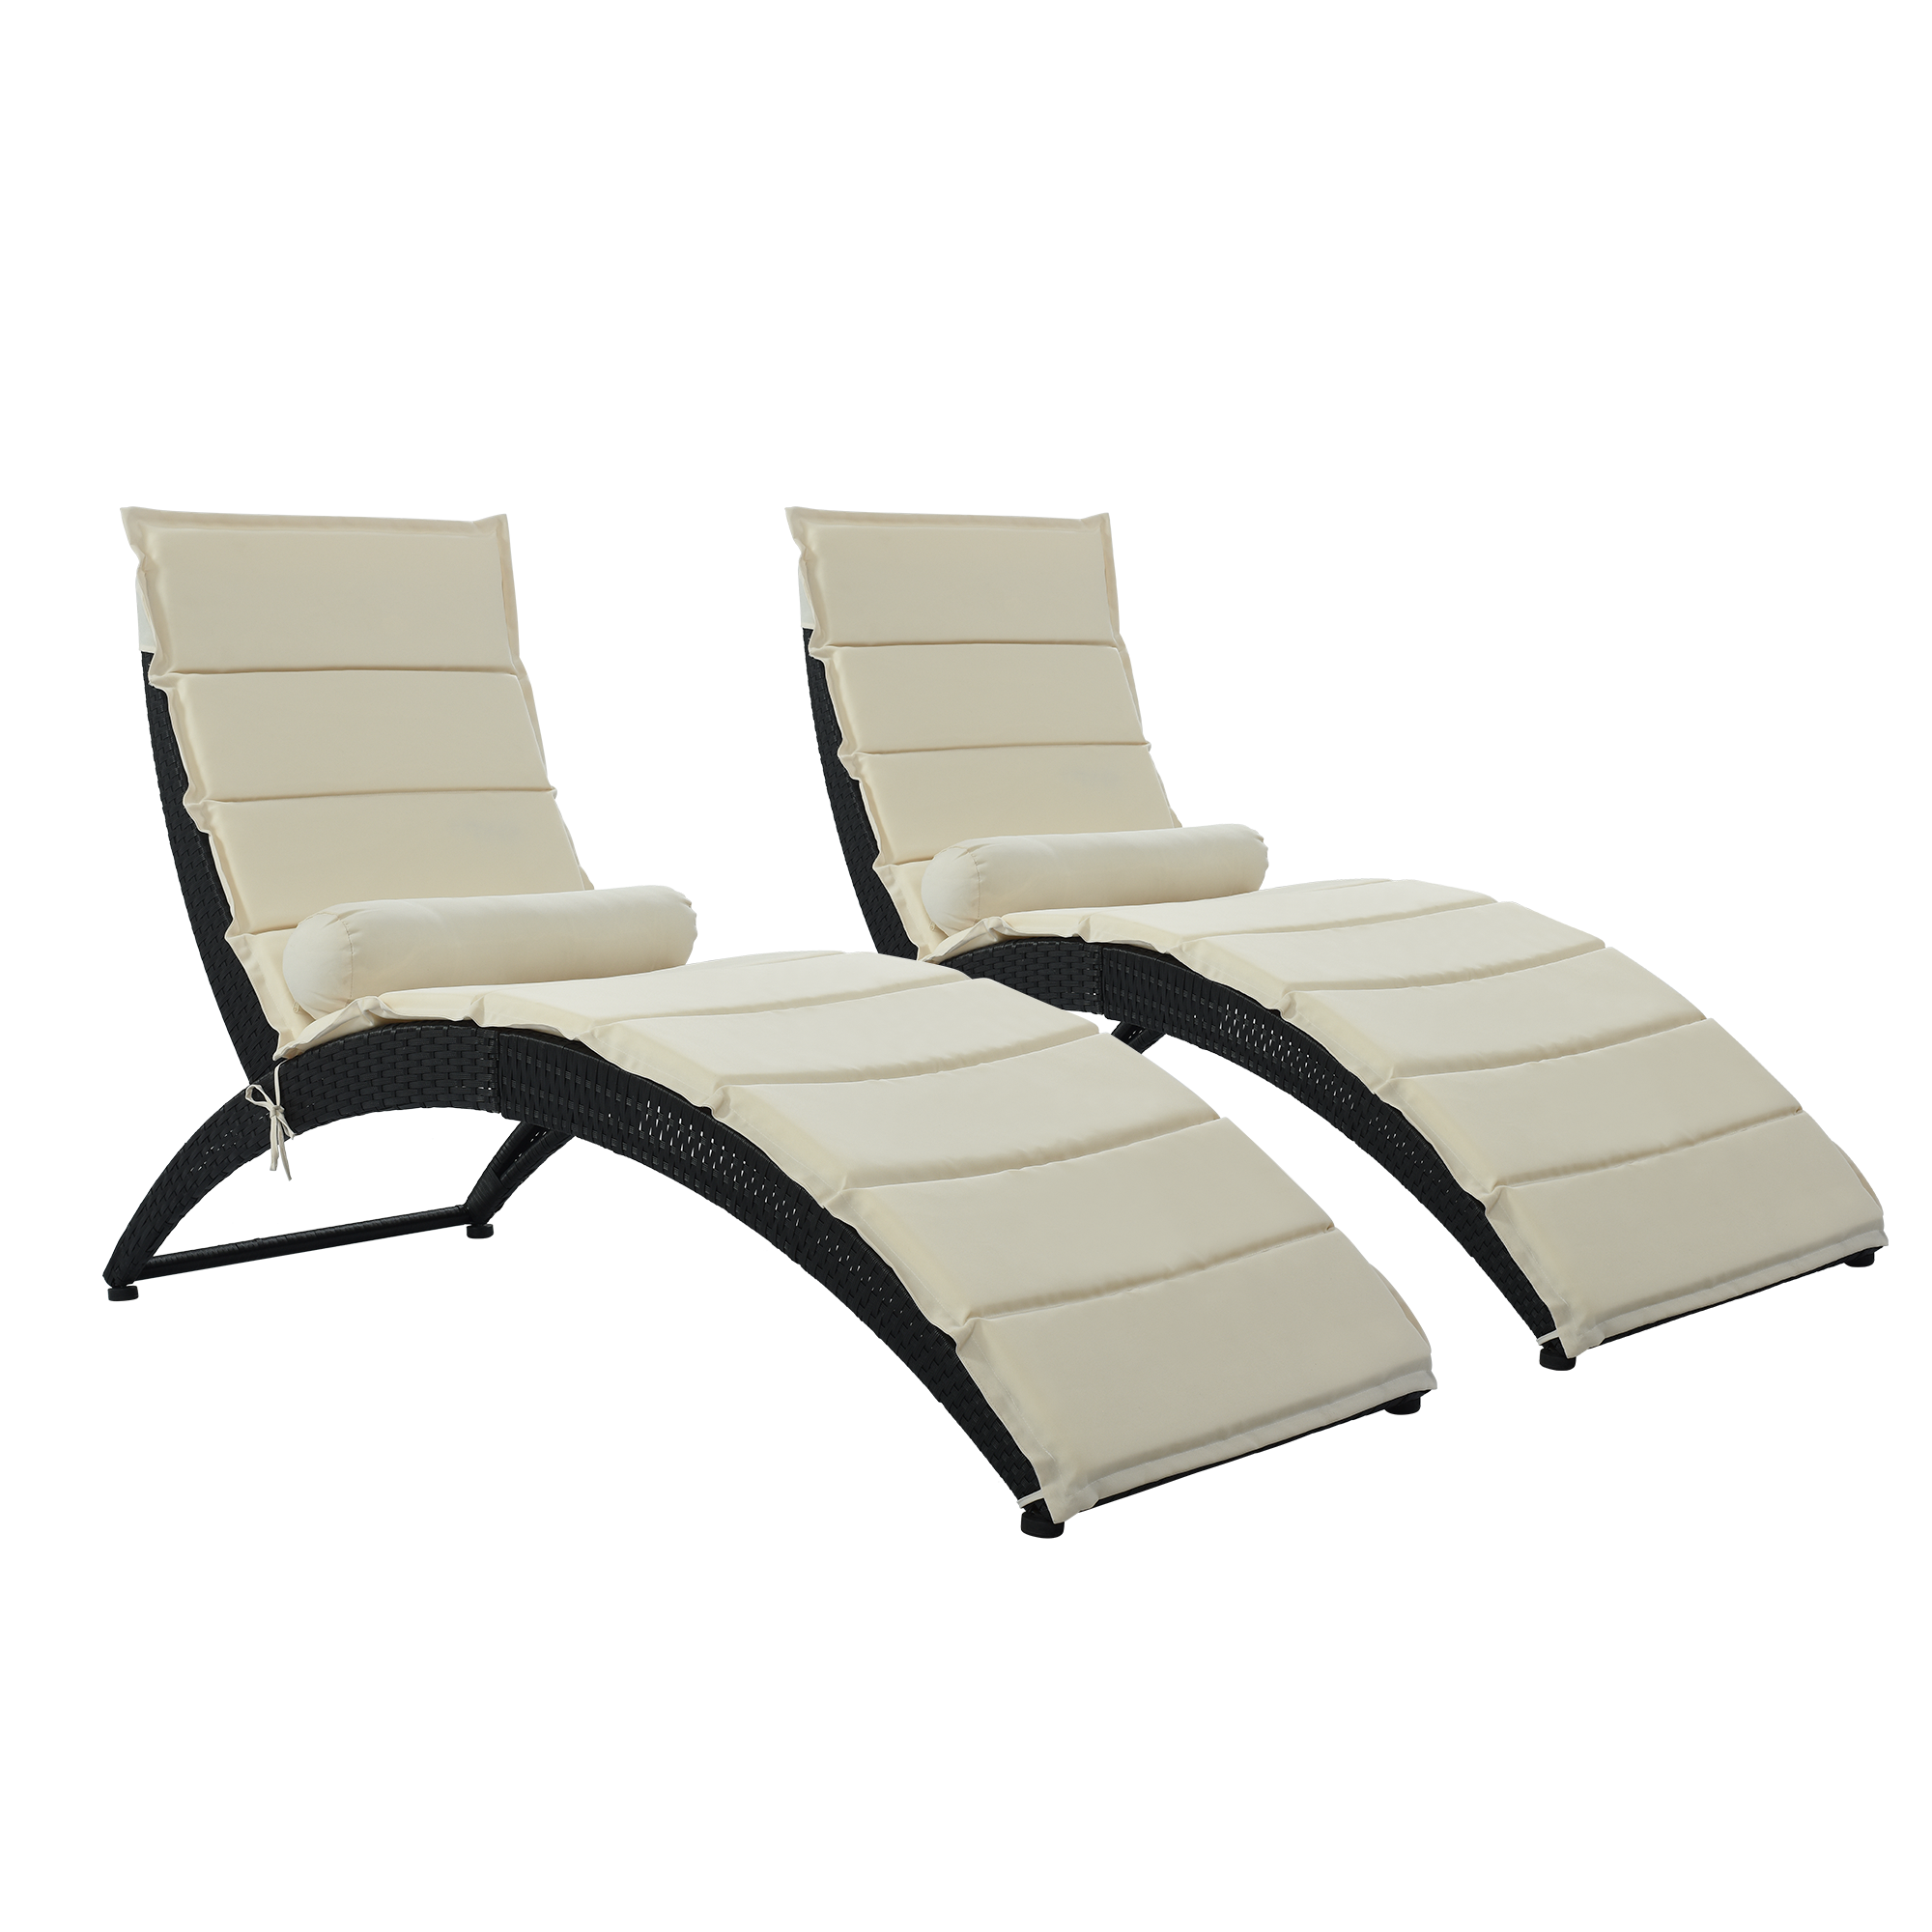 Outdoor Chaise Lounge Set of 2, PE Wicker Lounge Chairs for Outside, Adjustable Chaise Lounges with Removable Cushions, Outdoor Rattan Sunbed for Poolside, Patio, Backyard, Garden, Beige, D6380 - image 2 of 10